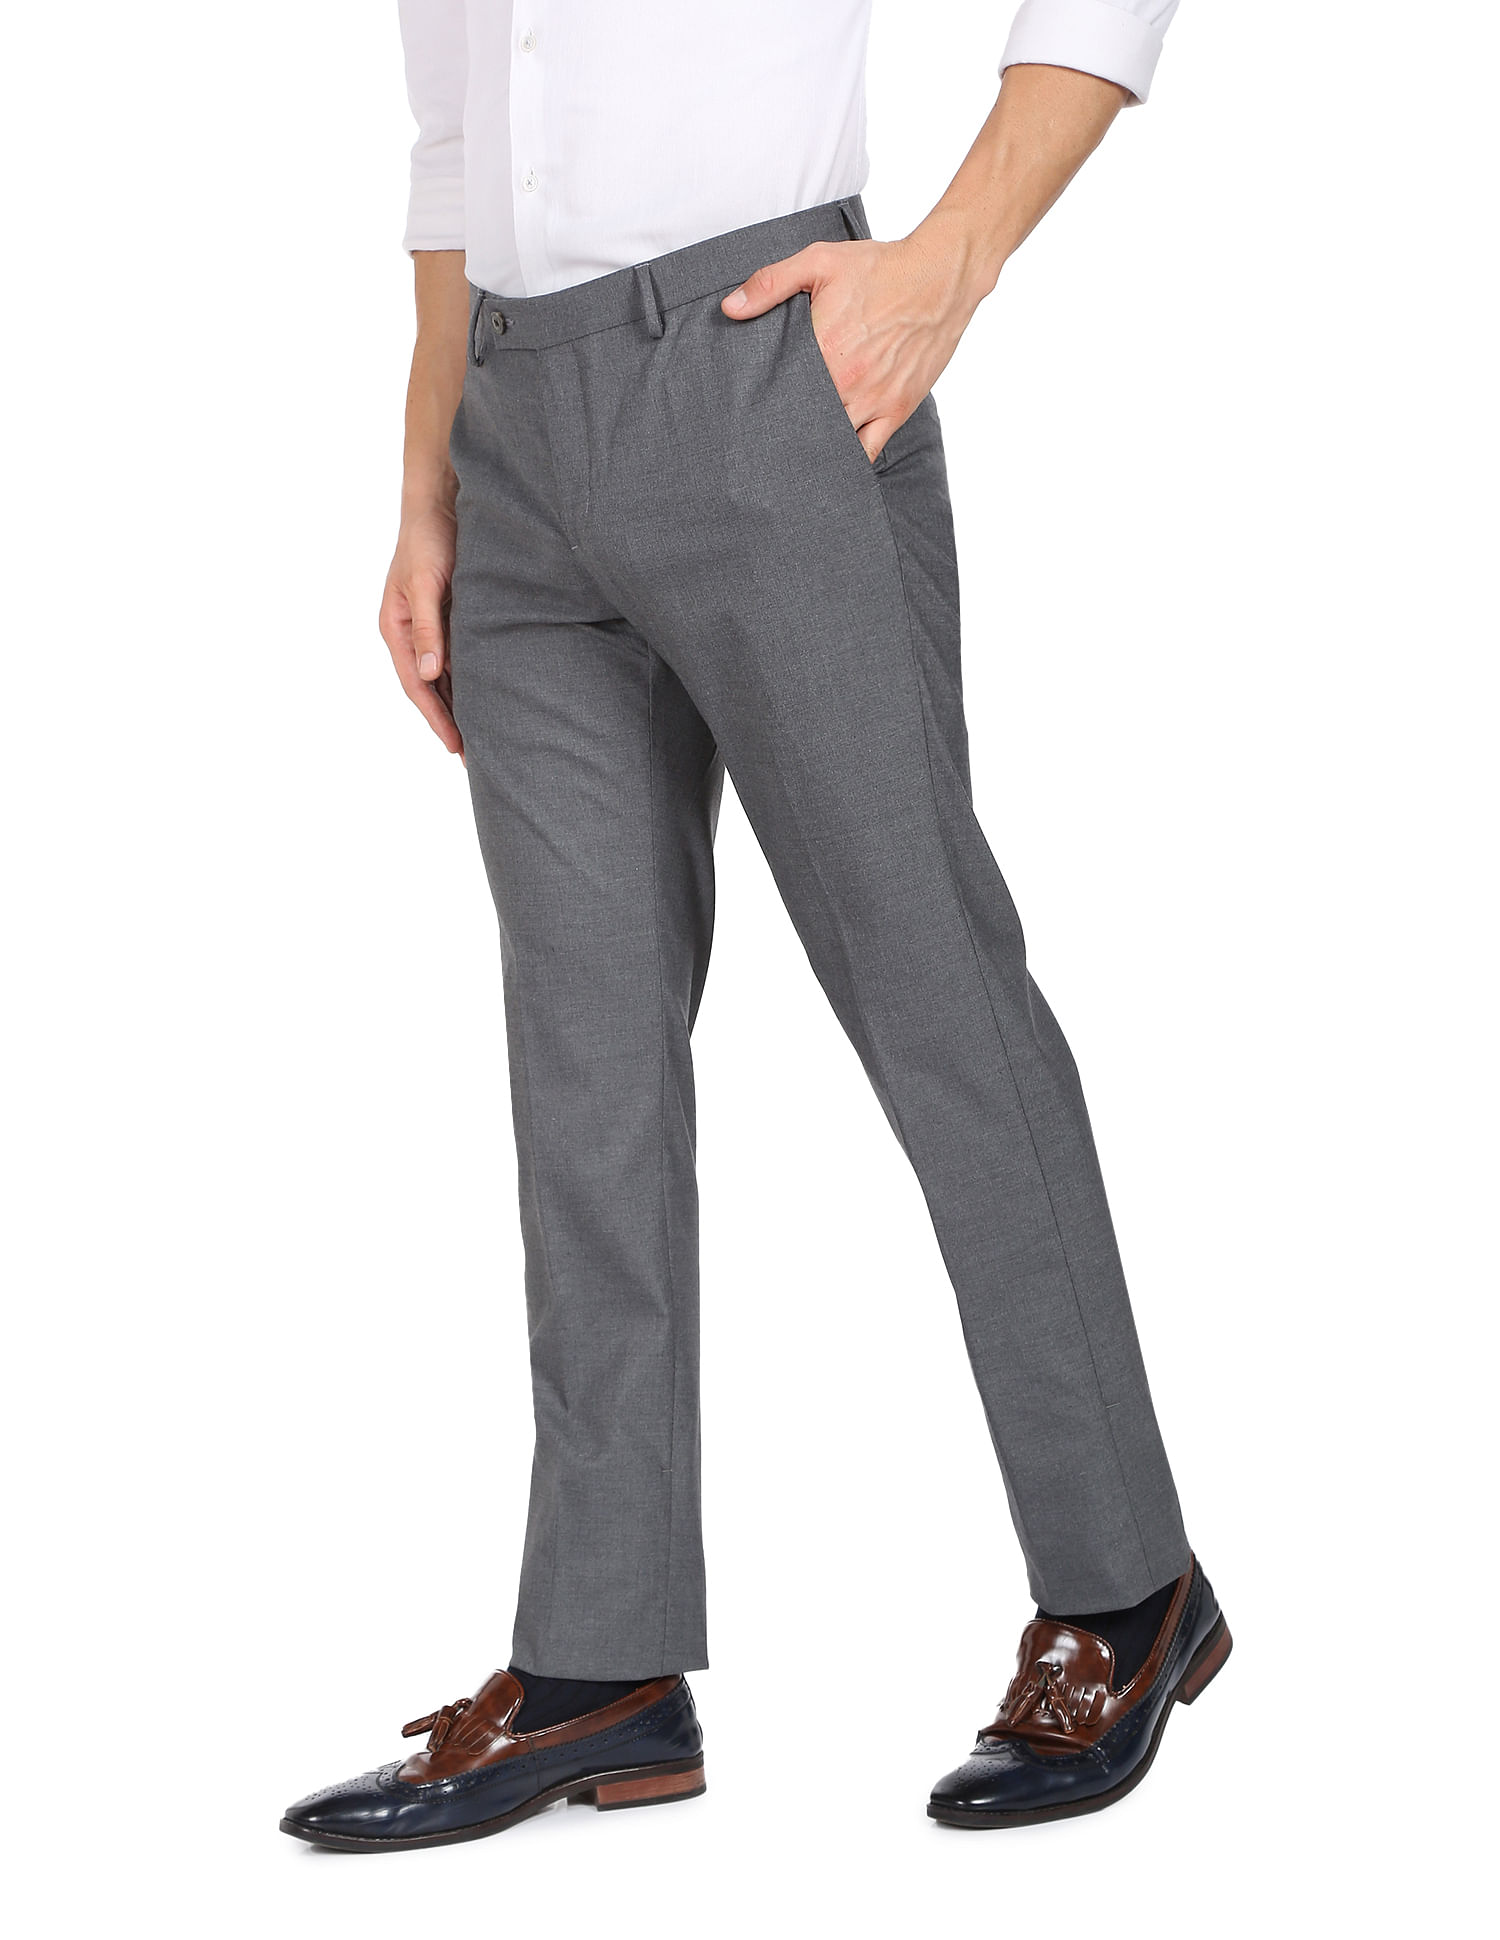 Buy Arrow Heathered Twill Weave Formal Trousers - NNNOW.com